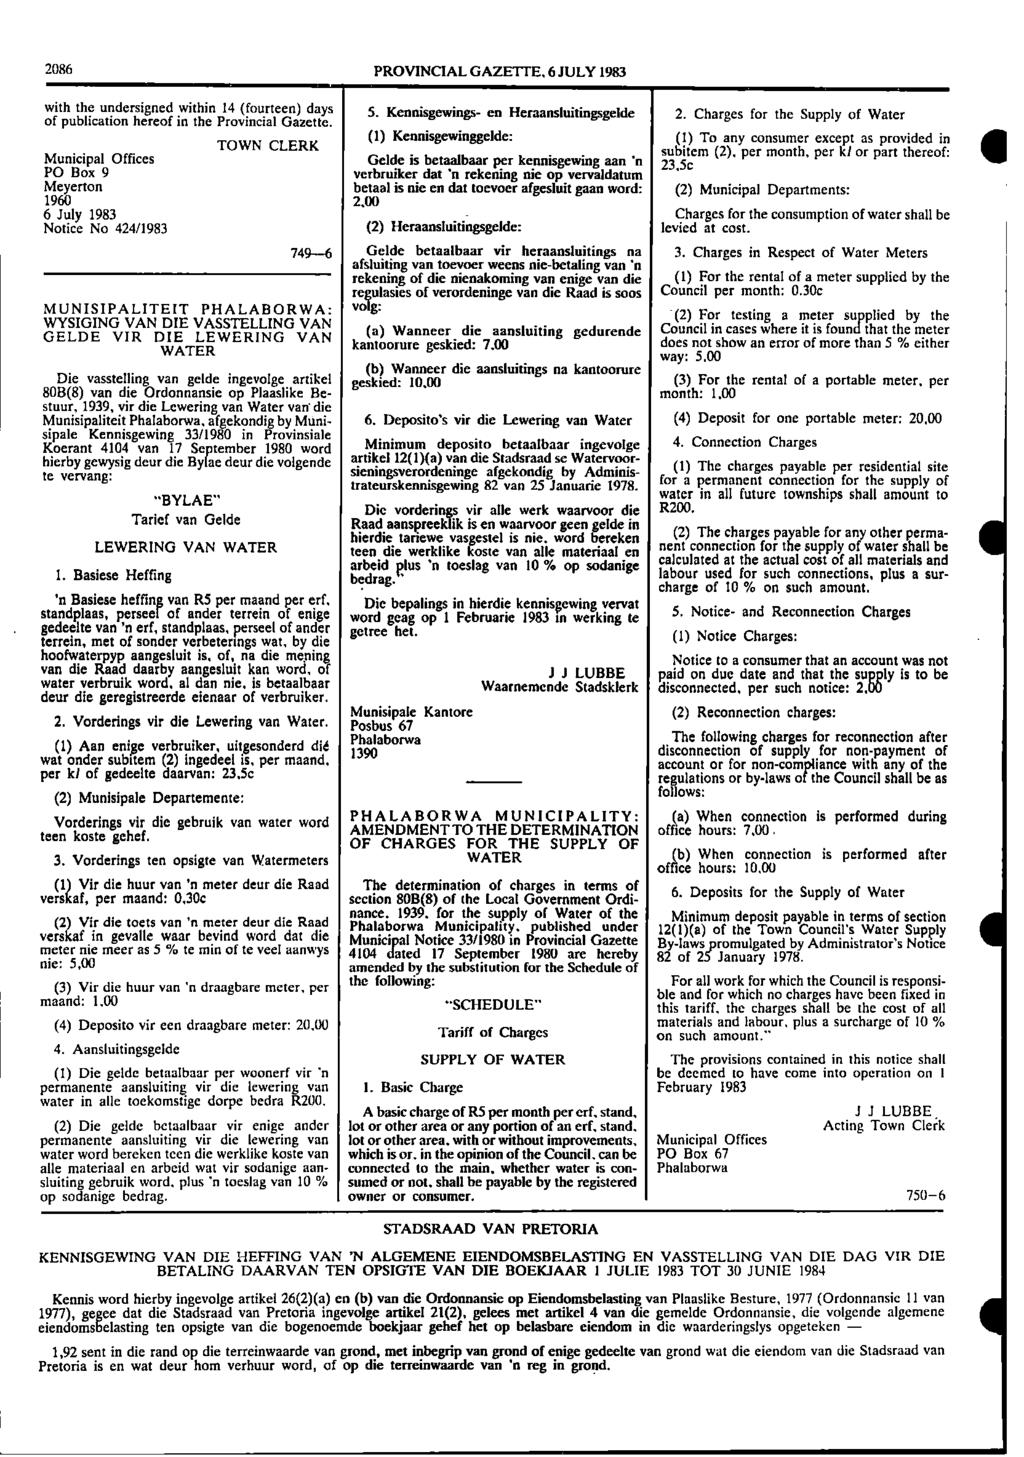 2086 PROVINCIAL GAZETTE 6 JULY 1983 with the undersigned within 14 (fourteen) days 5 Kennisgewings en Heraansluitingsgelde 2 Charges for the Supply of publication hereof in the Provincial Gazette of